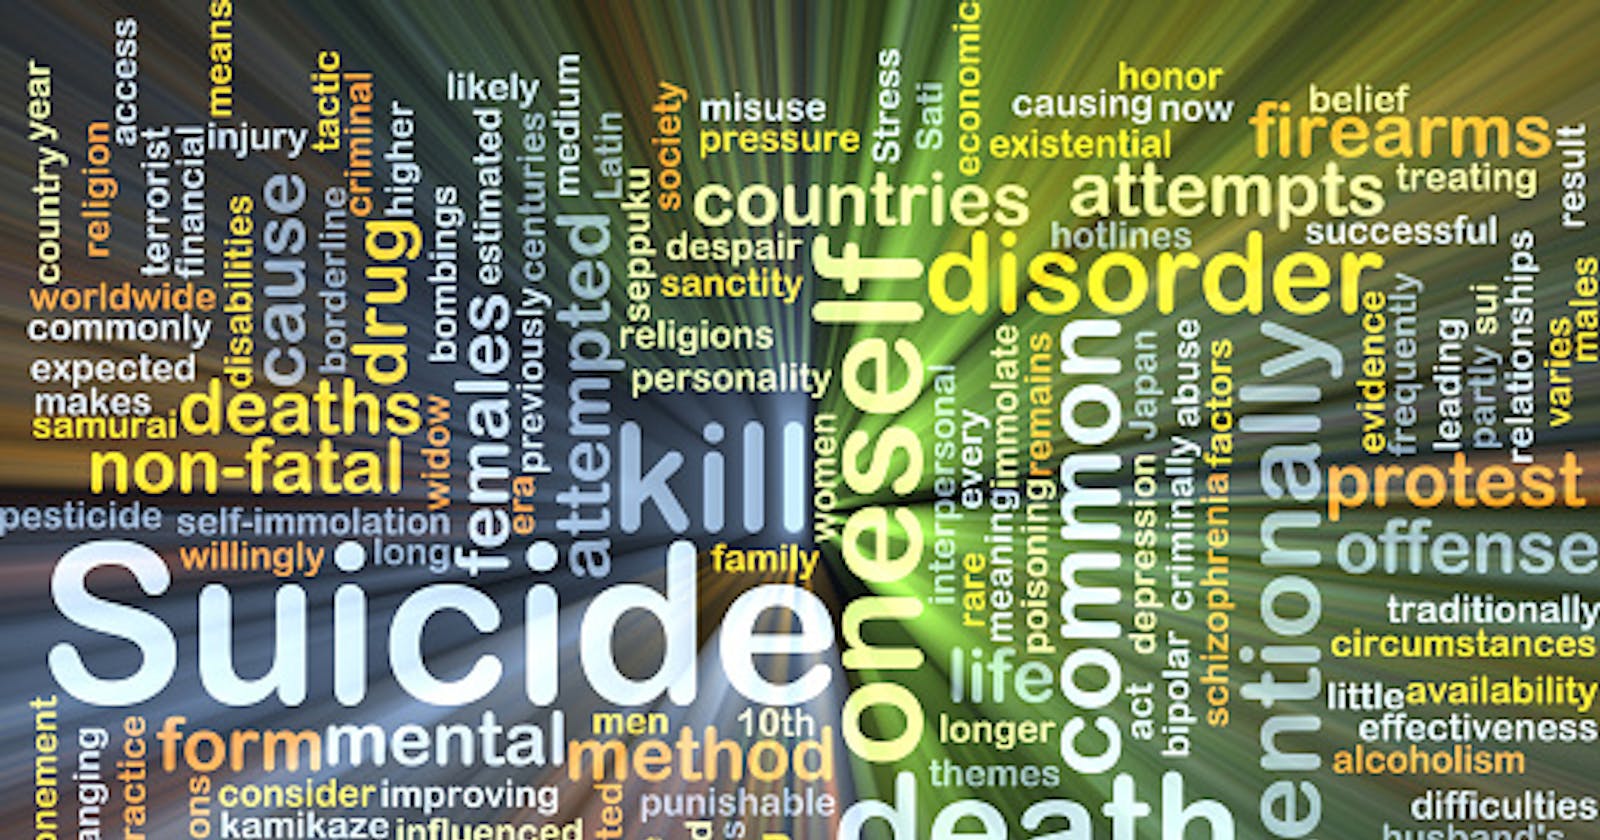 Global Suicide Rate Analysis